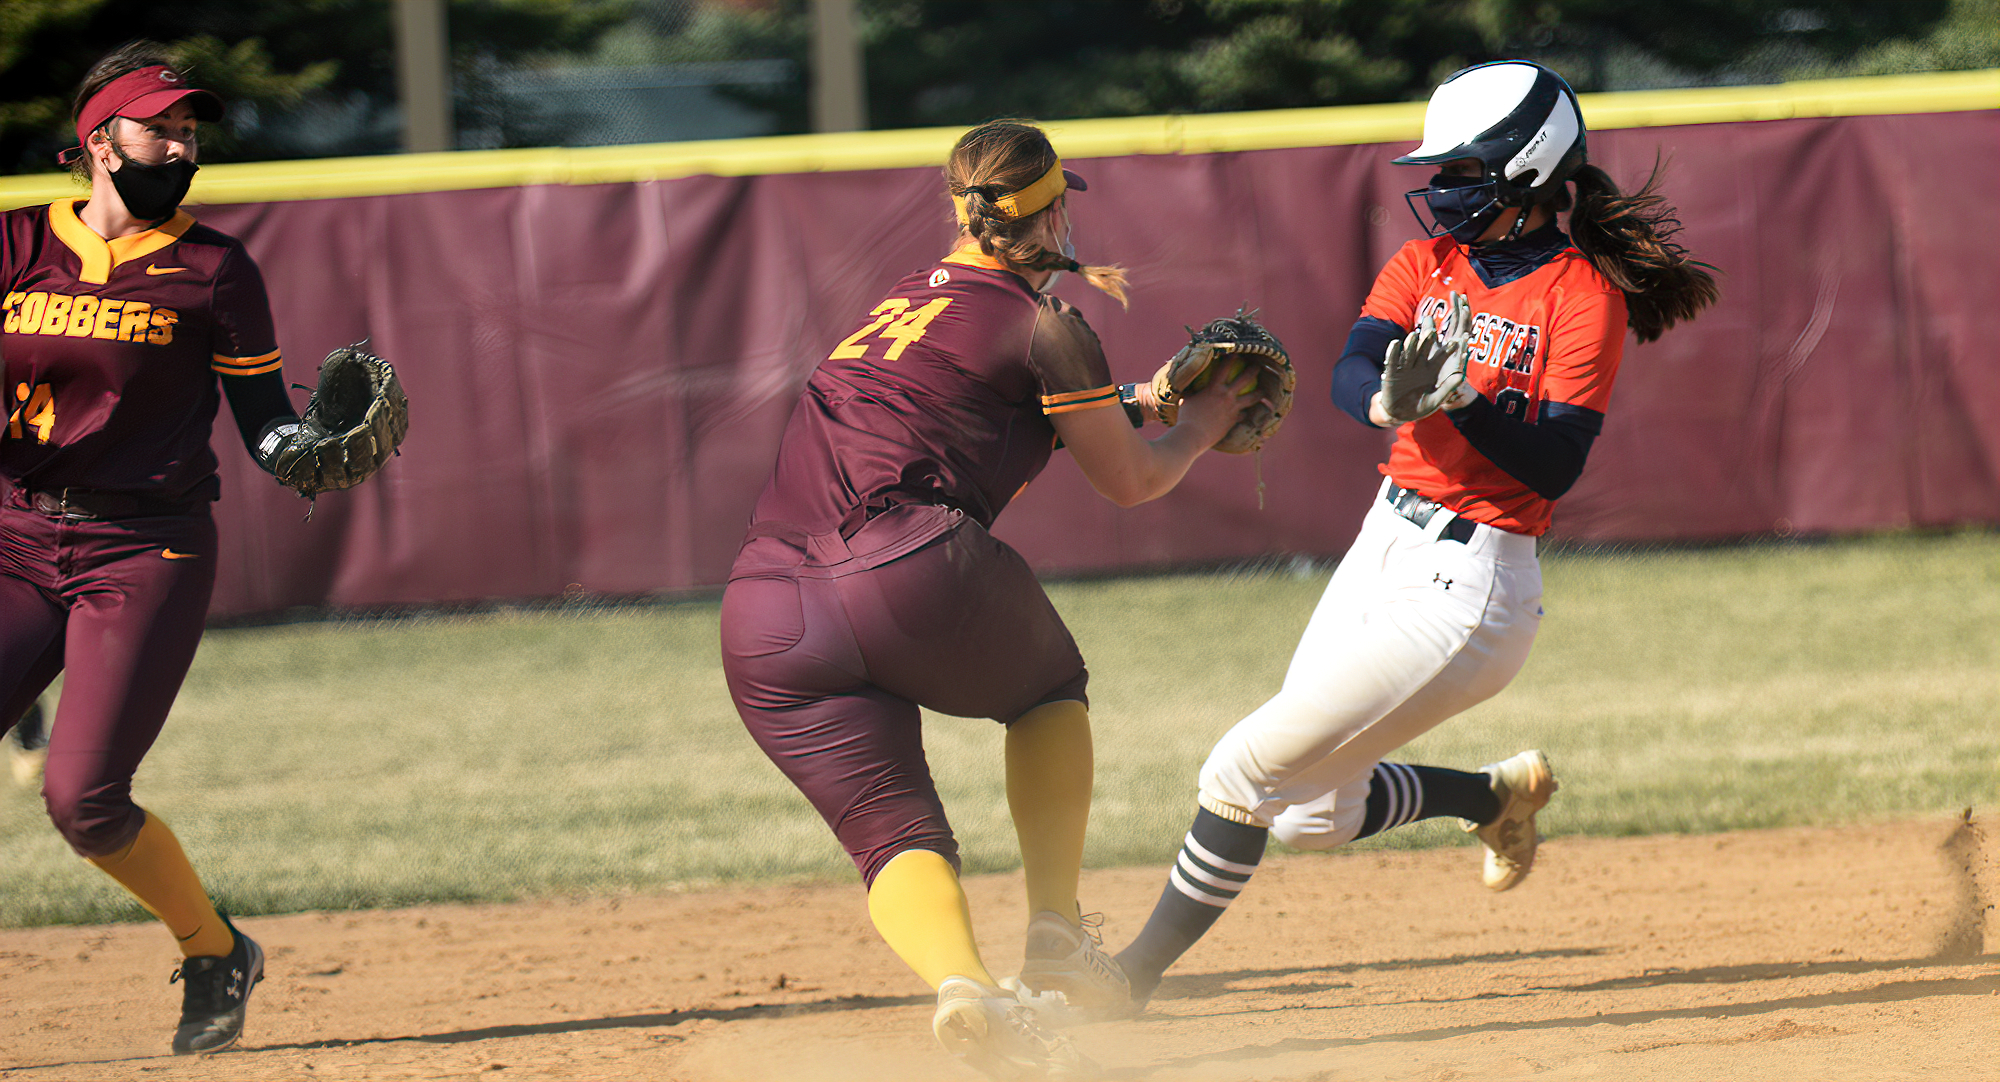 Taylor Erholtz goes to make the tag on a Macalester base runner at third base in the Cobbers' 3-2, 11-5 sweep over the Scots.